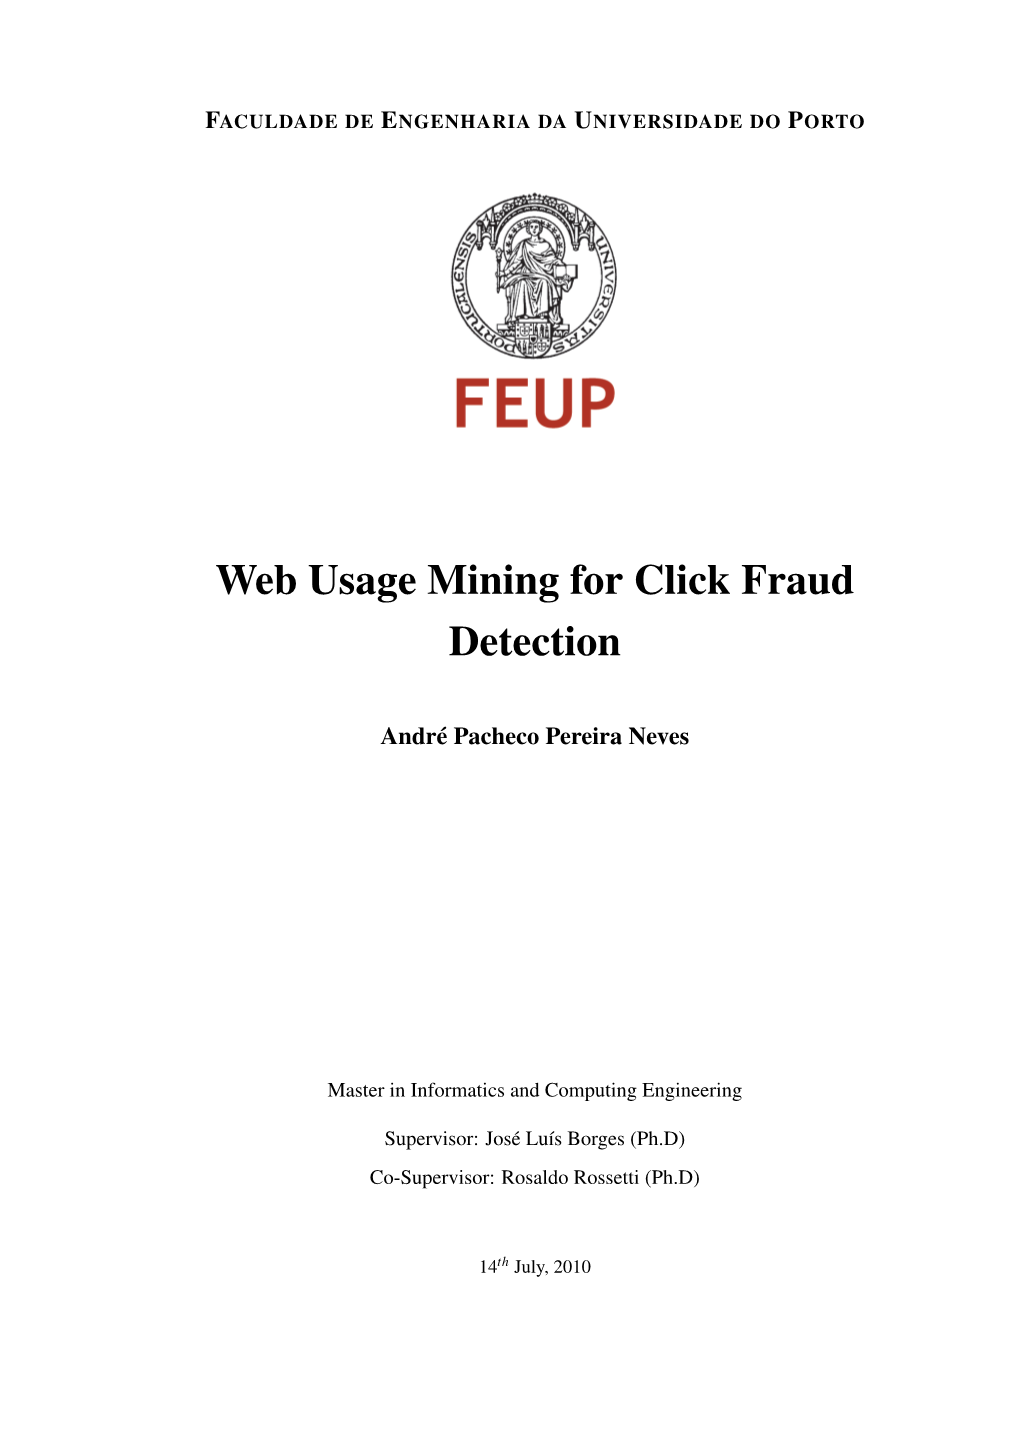 Web Usage Mining for Click Fraud Detection